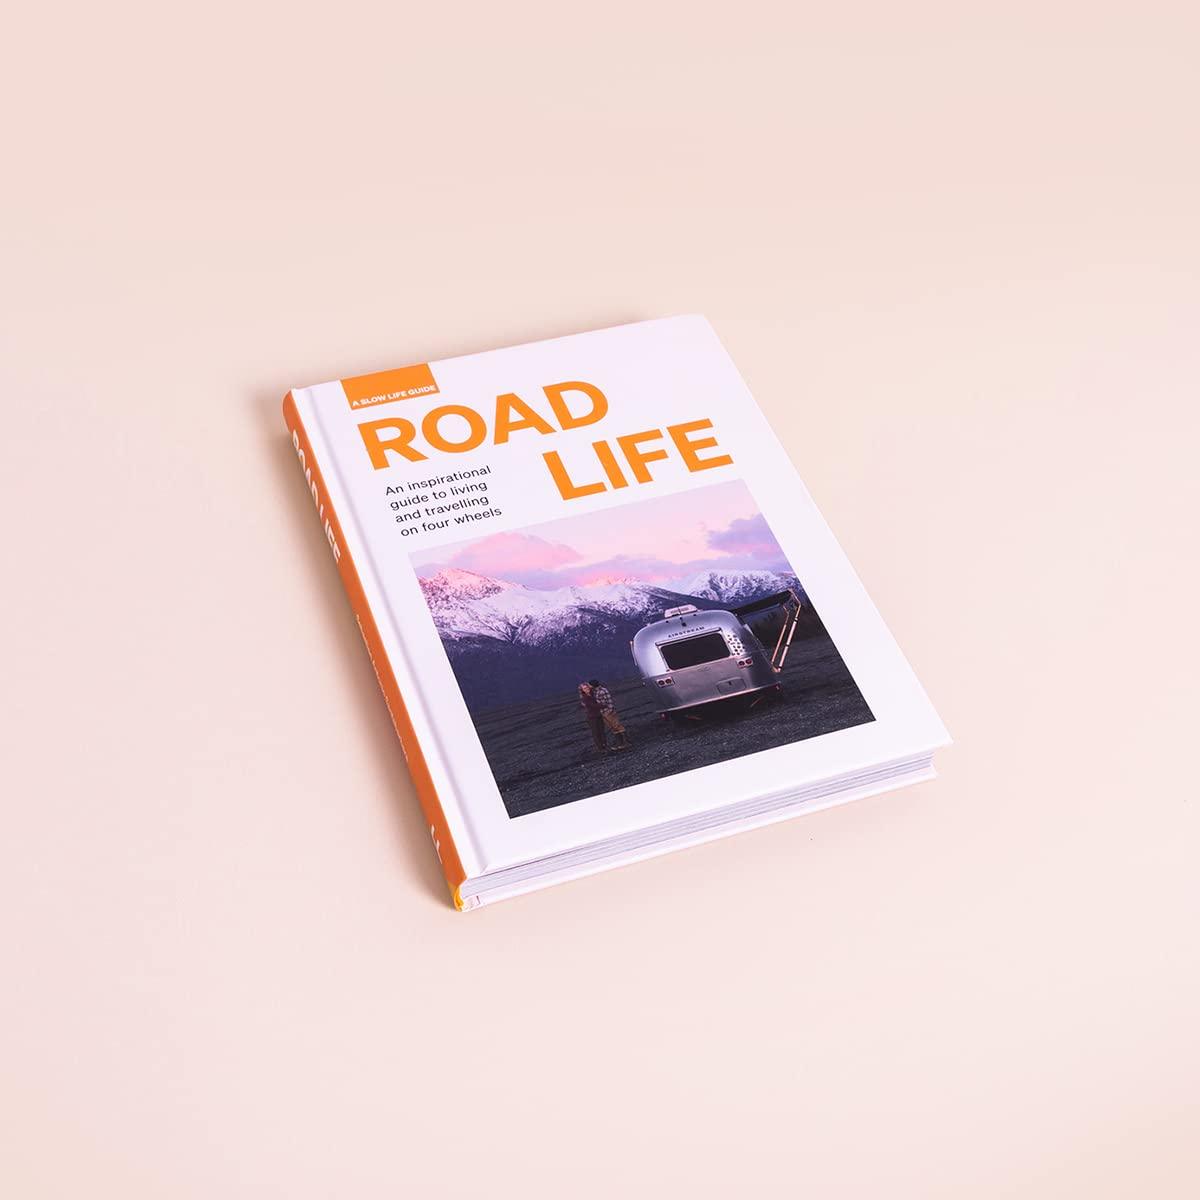 Road Life - An Inspirational Guide To Living And Travelling On Four Wheels - STUDIO JO STORE